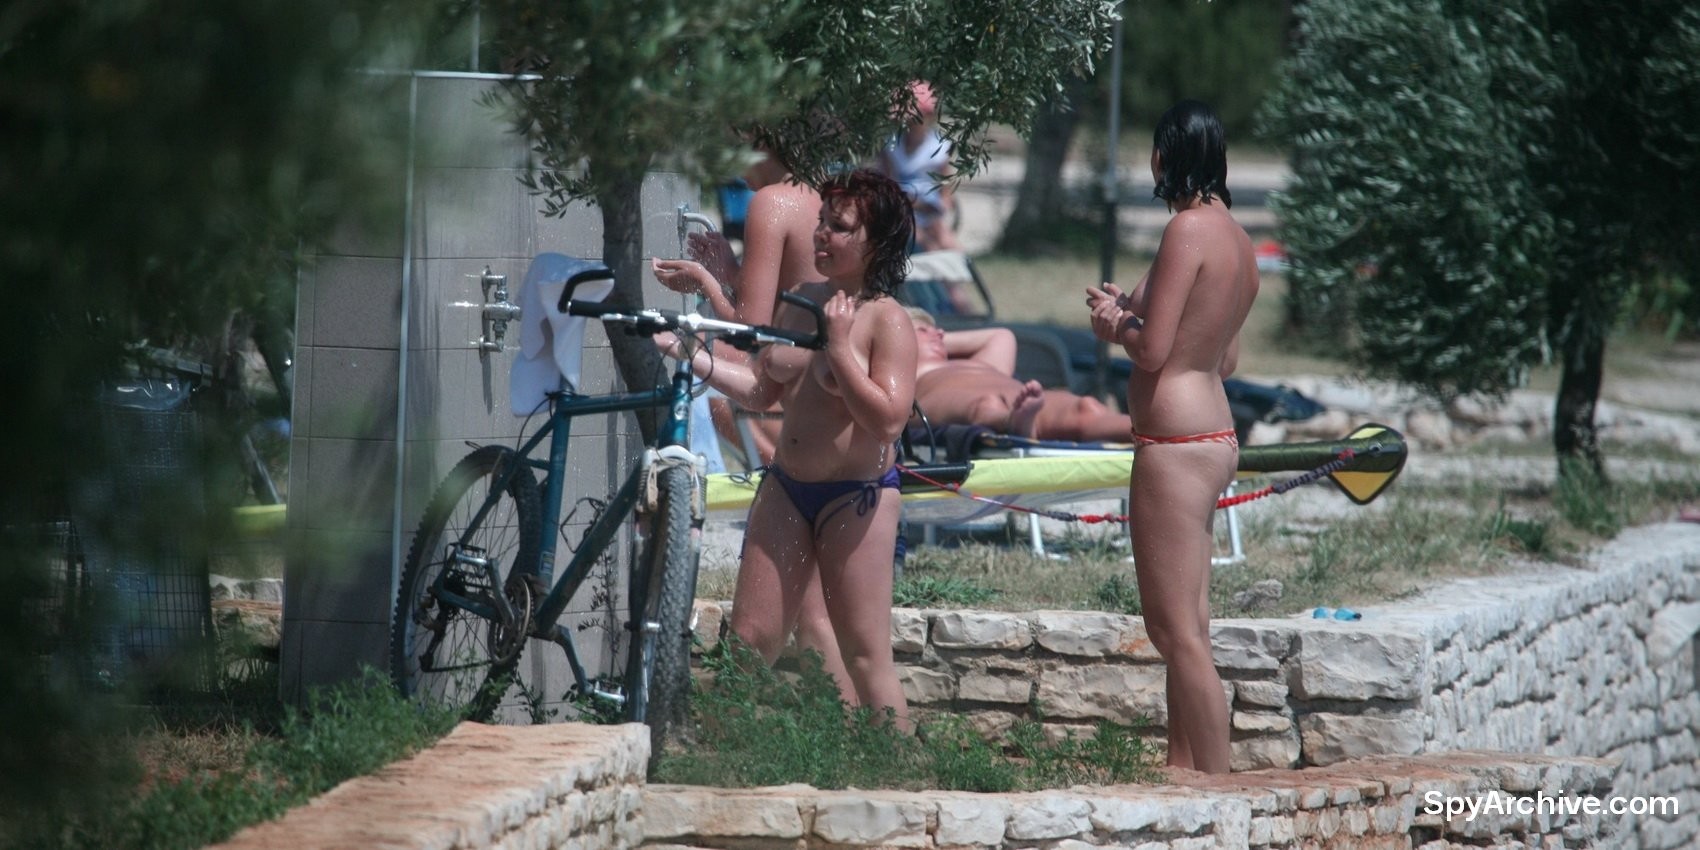 Spying on lovely naked girls at nudist camp #74699516